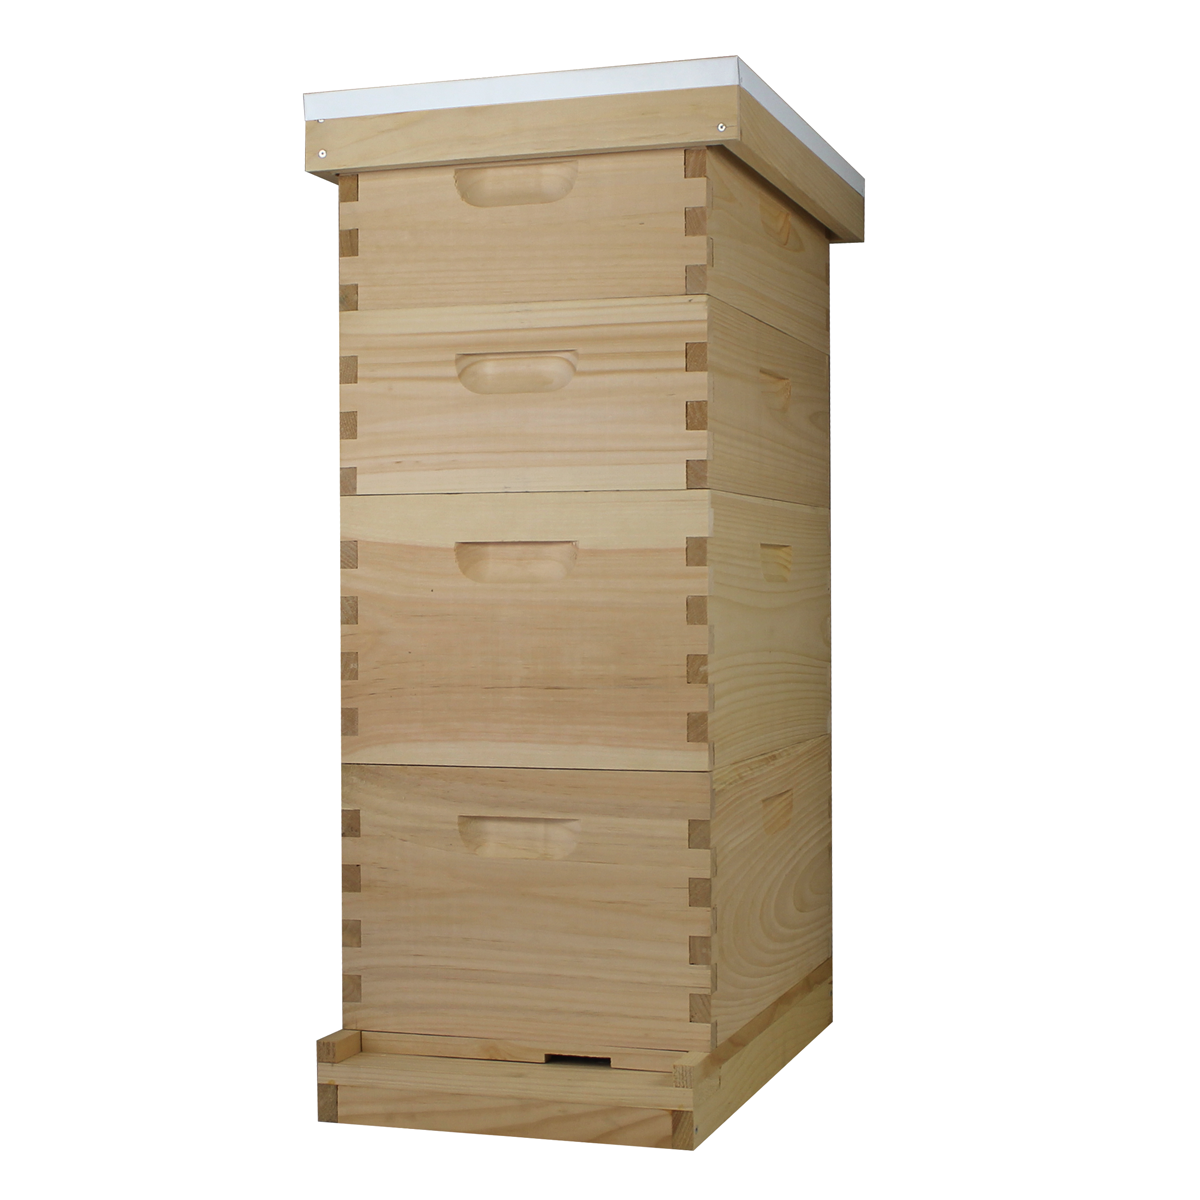 Busy Bees 'N' More Amish Made 8 Frame Beehive With 2 Deep Bee Boxes & 2 Medium Bee Boxes